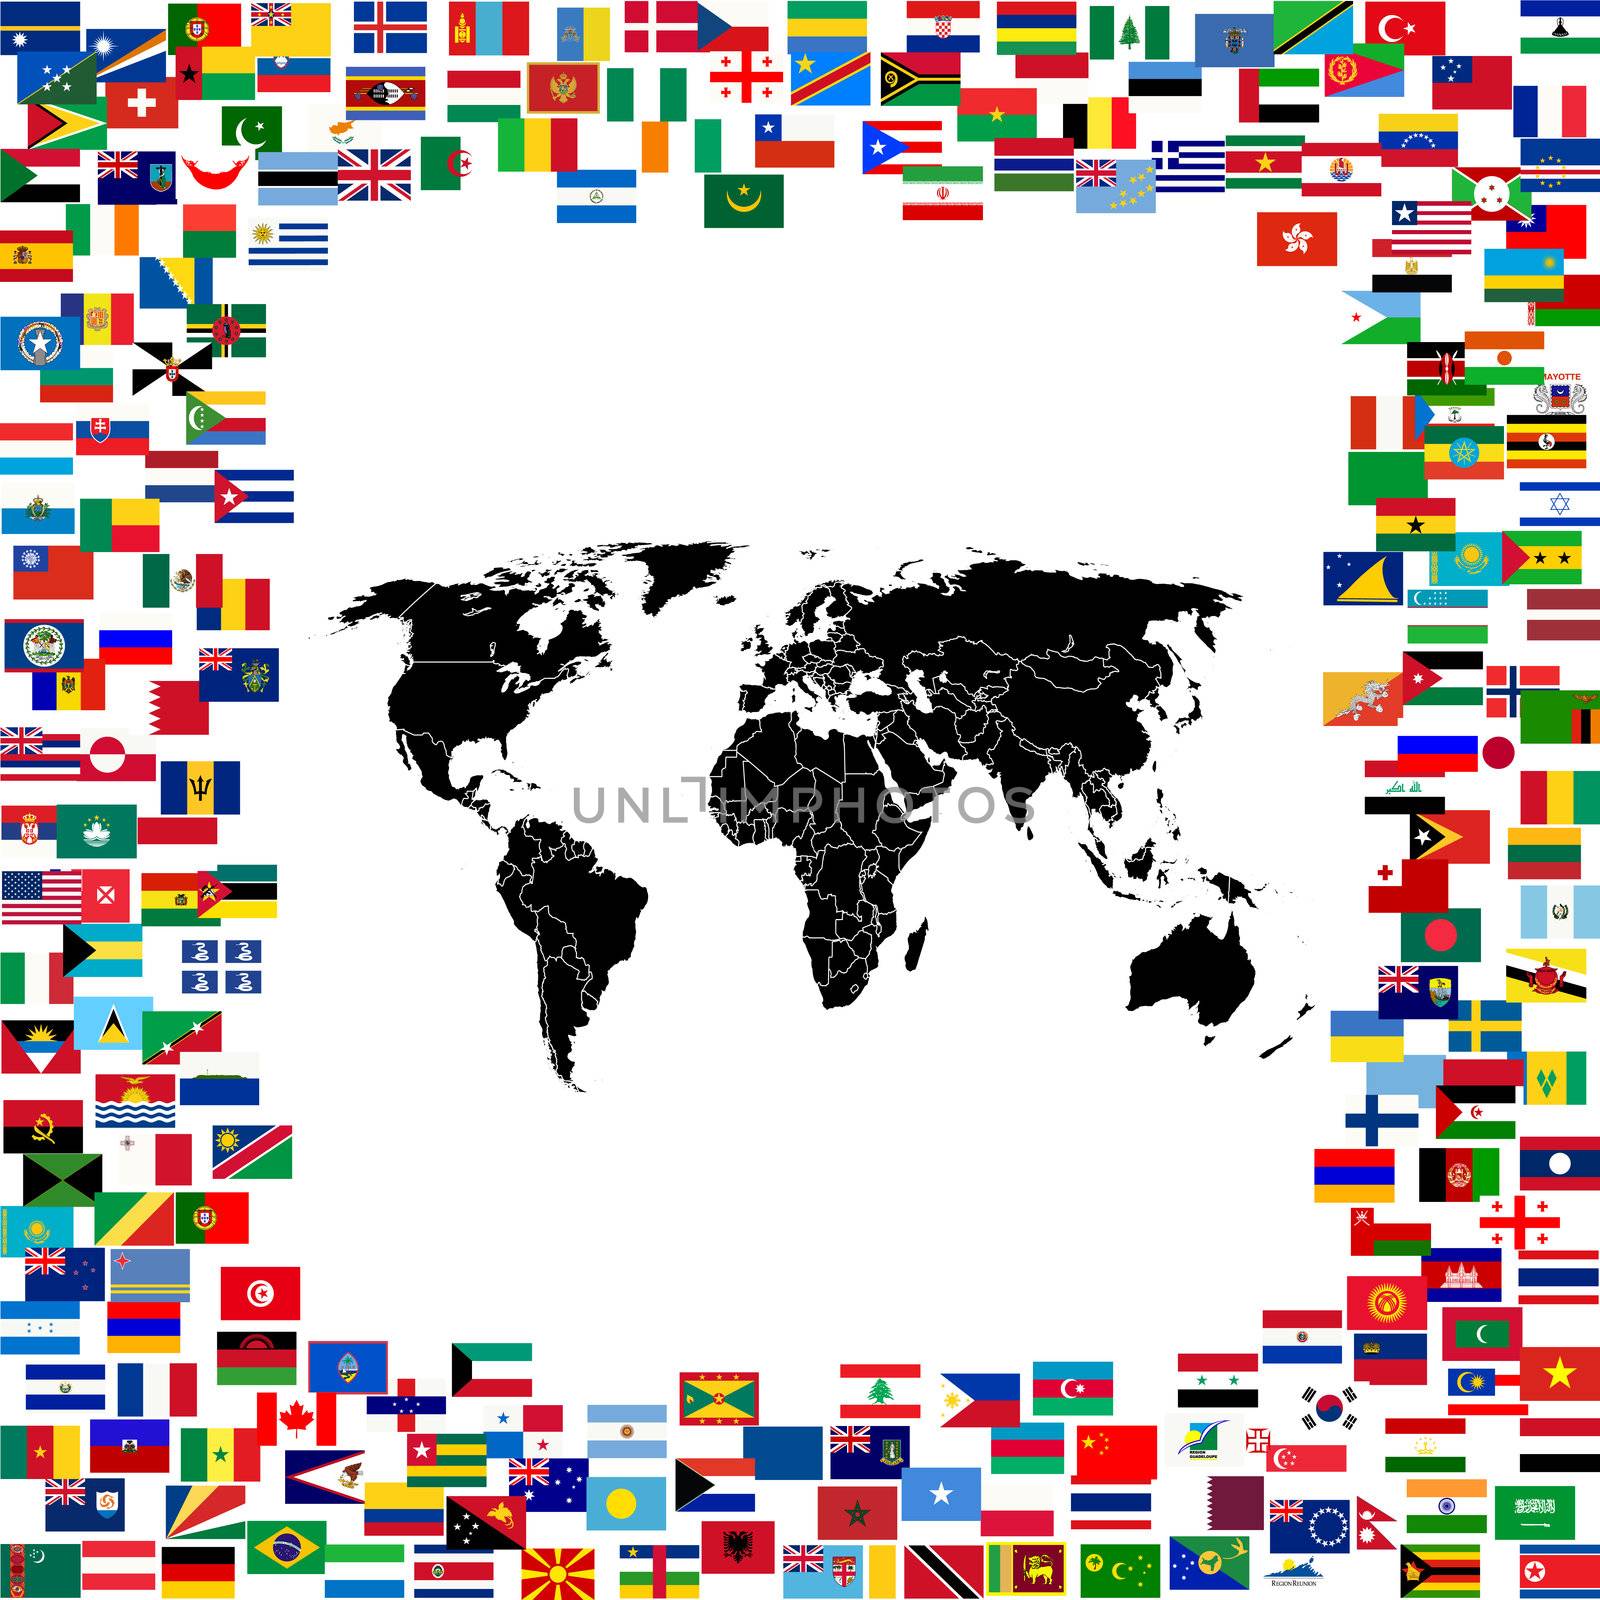 World map framed with world flags by hibrida13